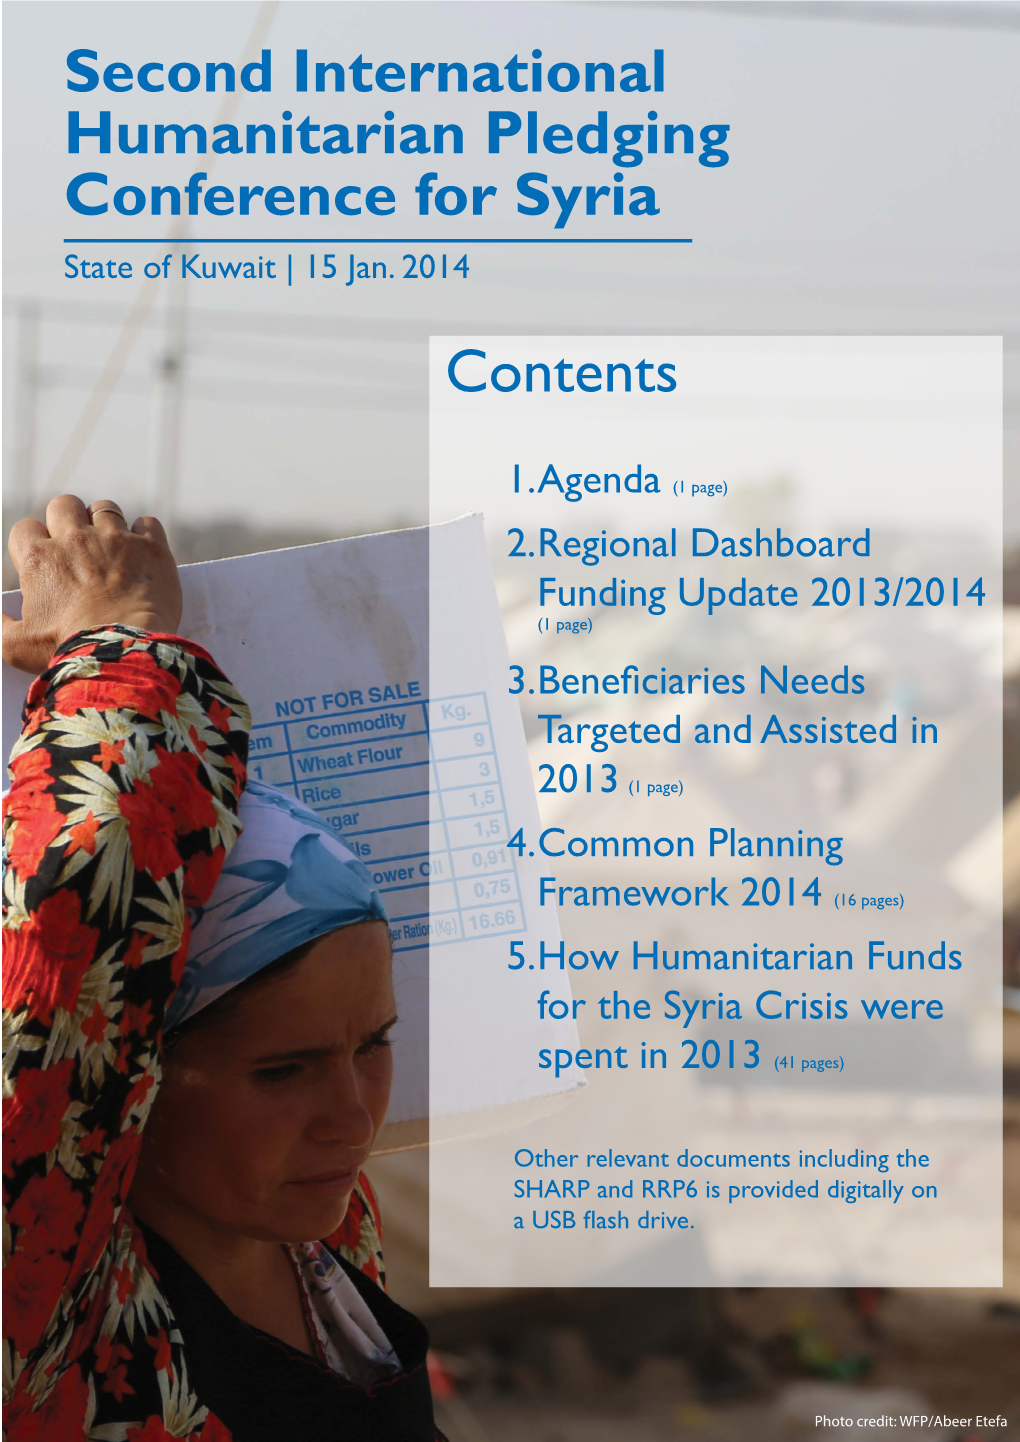 Second International Humanitarian Pledging Conference for Syria State of Kuwait | 15 Jan